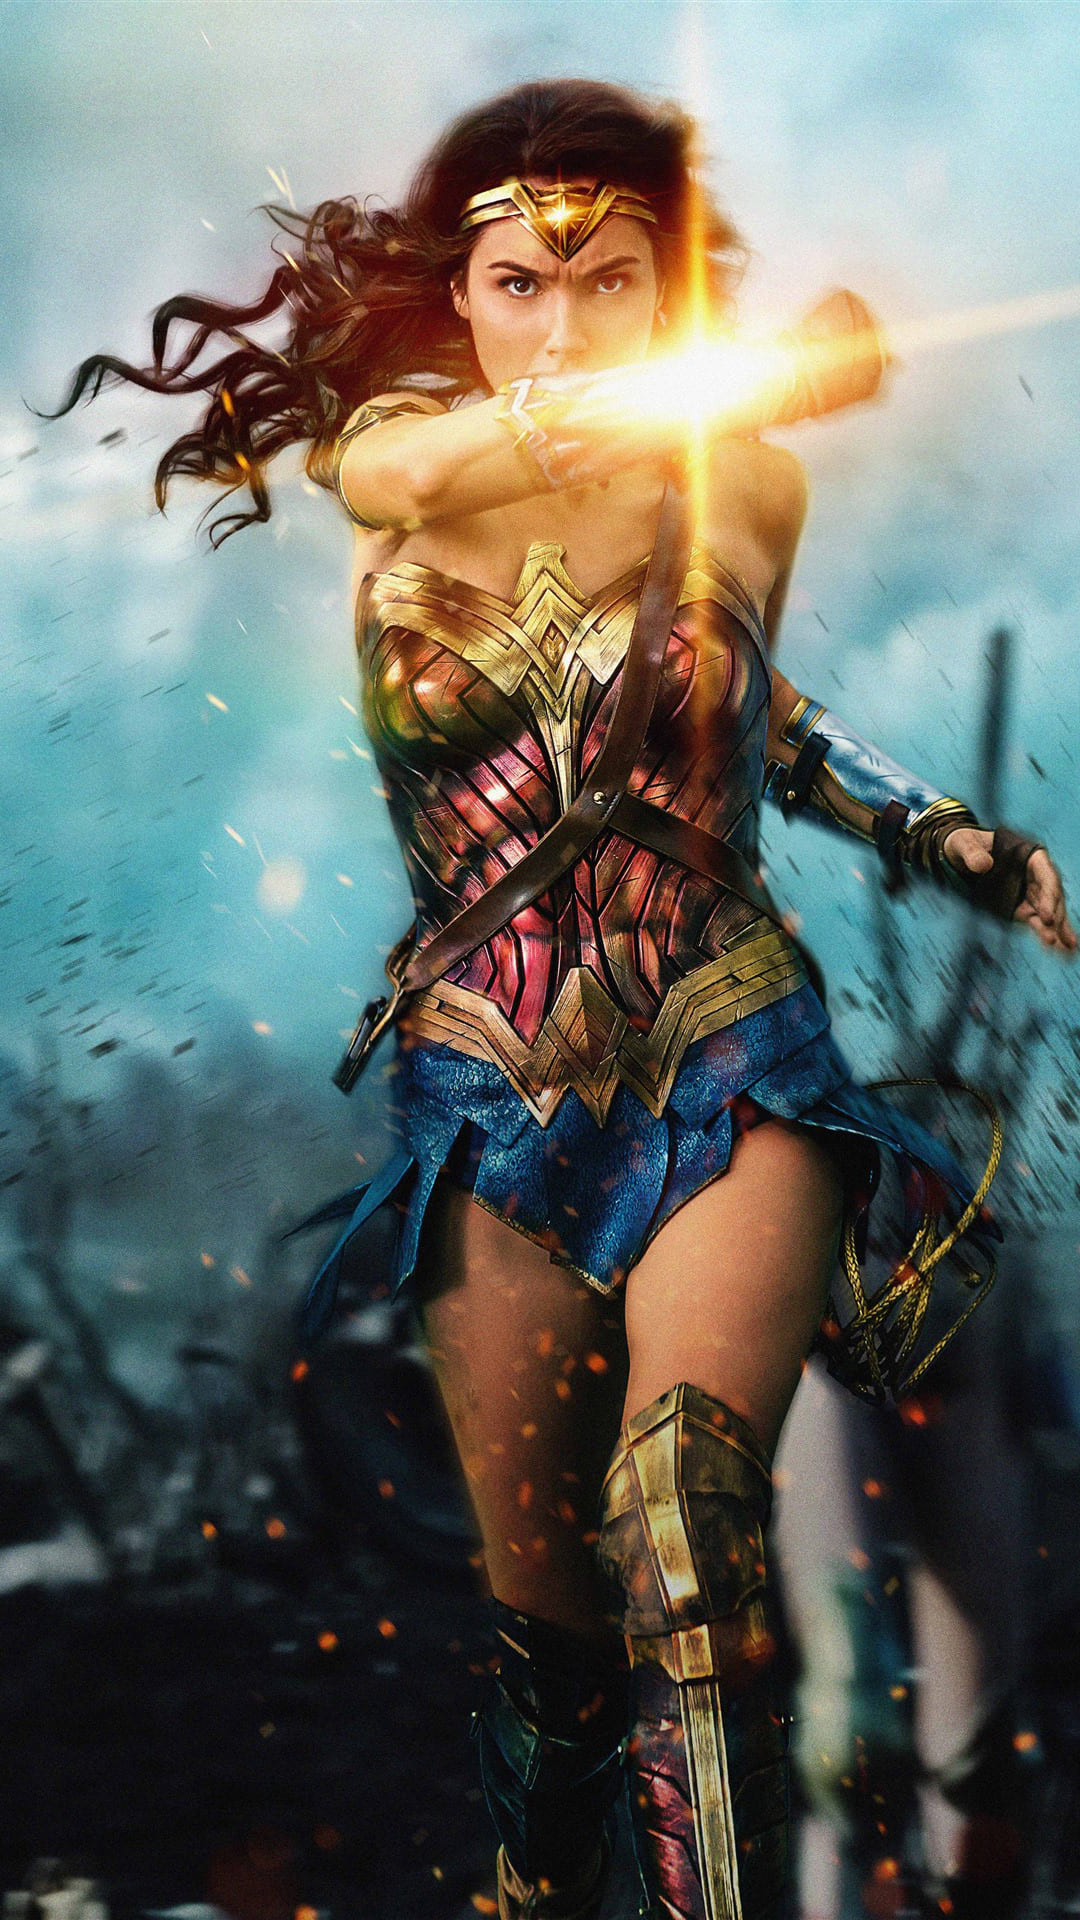 Wonder Woman with green and red lights Wallpaper 4k Ultra HD ID6300